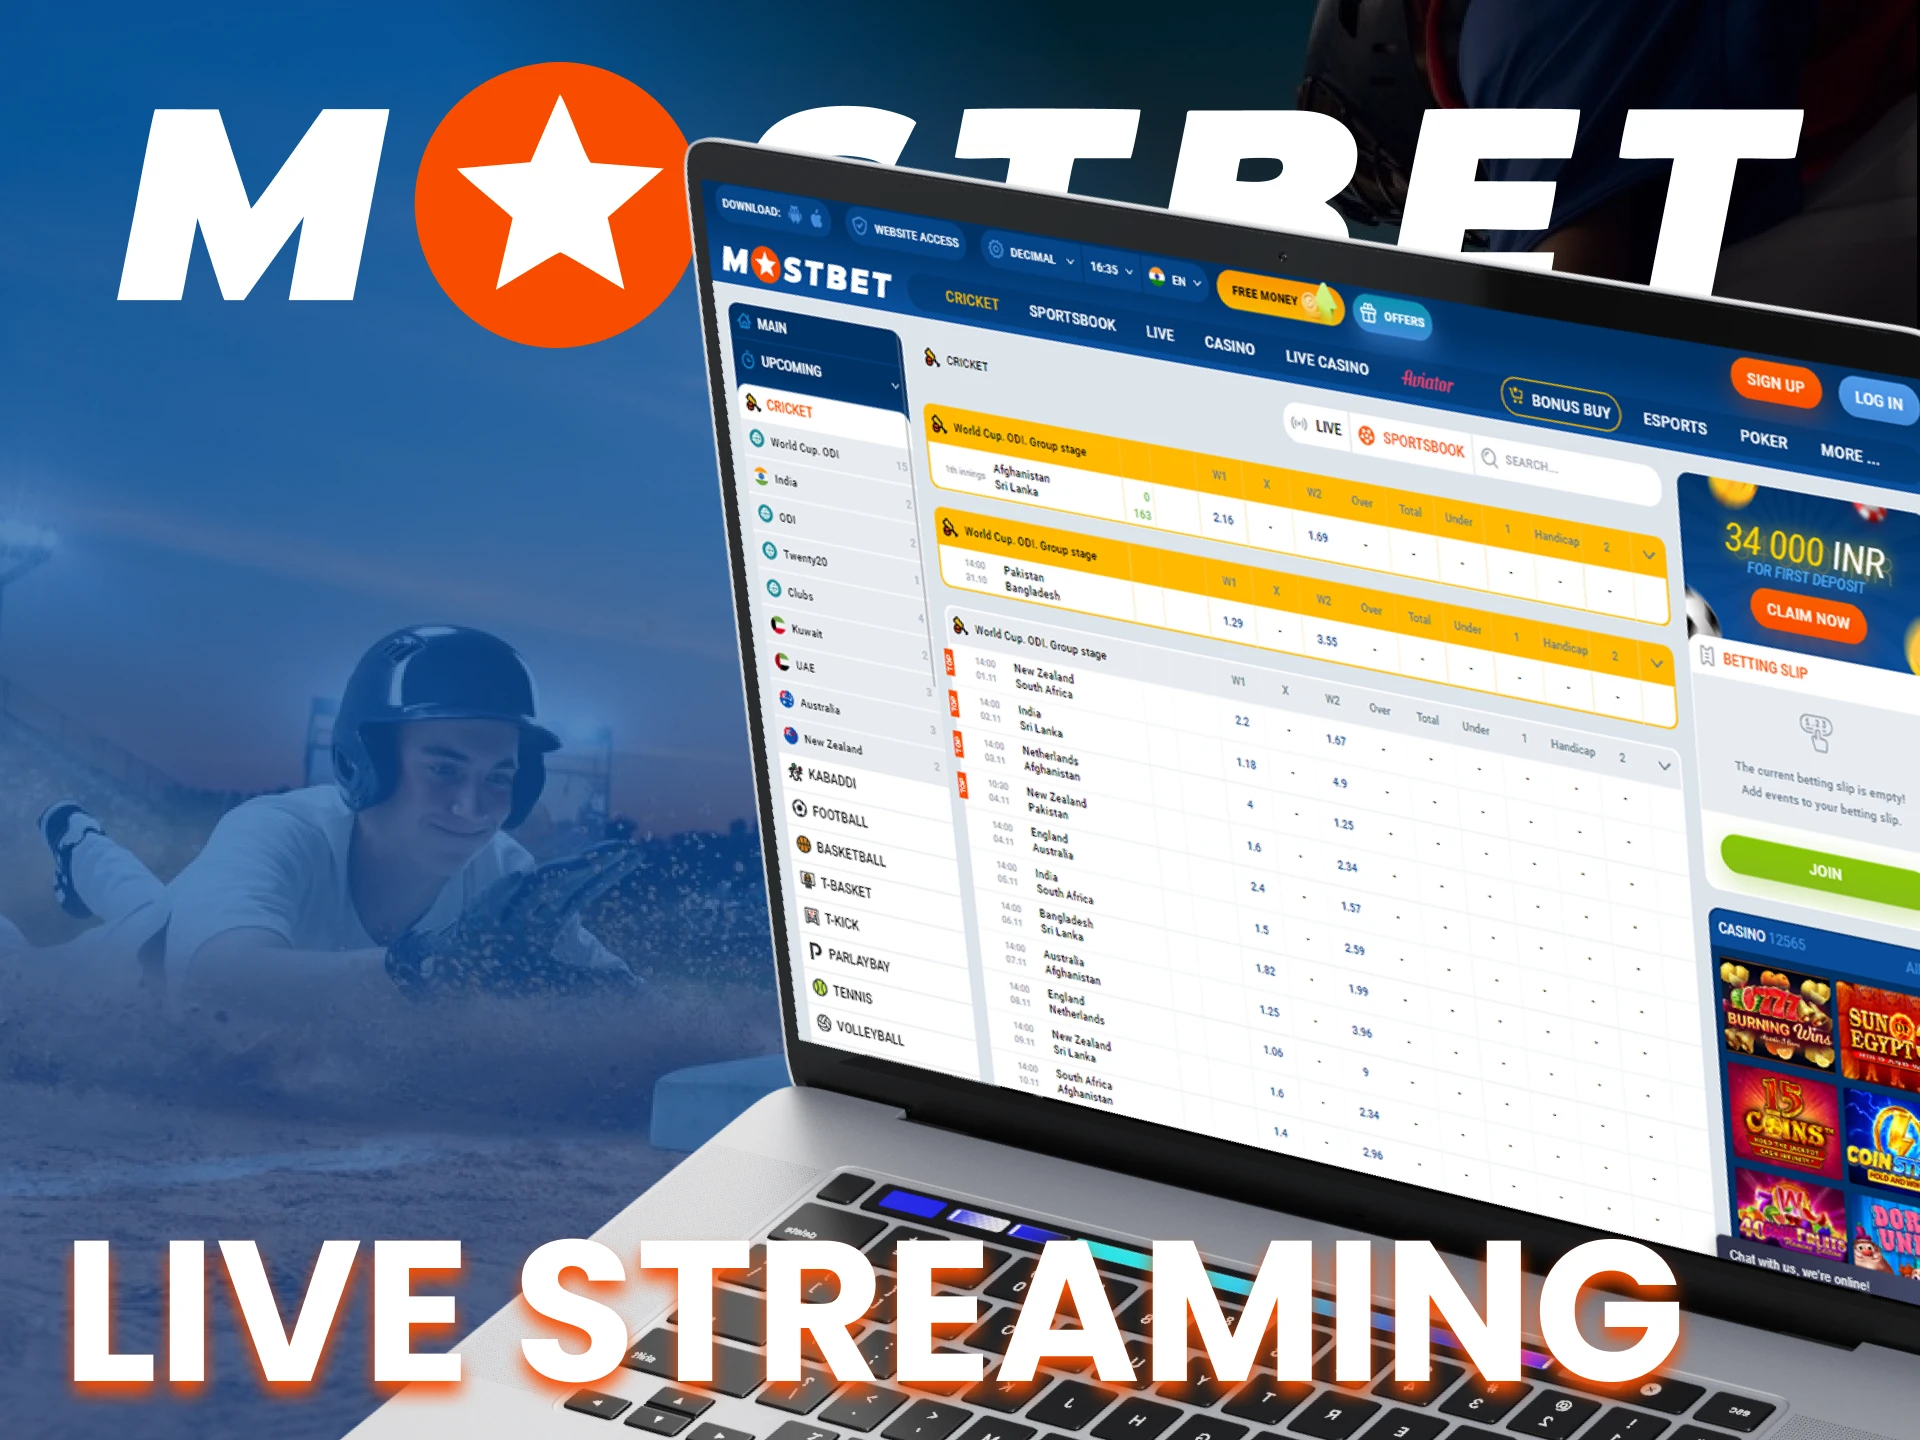 At Mostbet you have the opportunity to bet while live streaming the match.